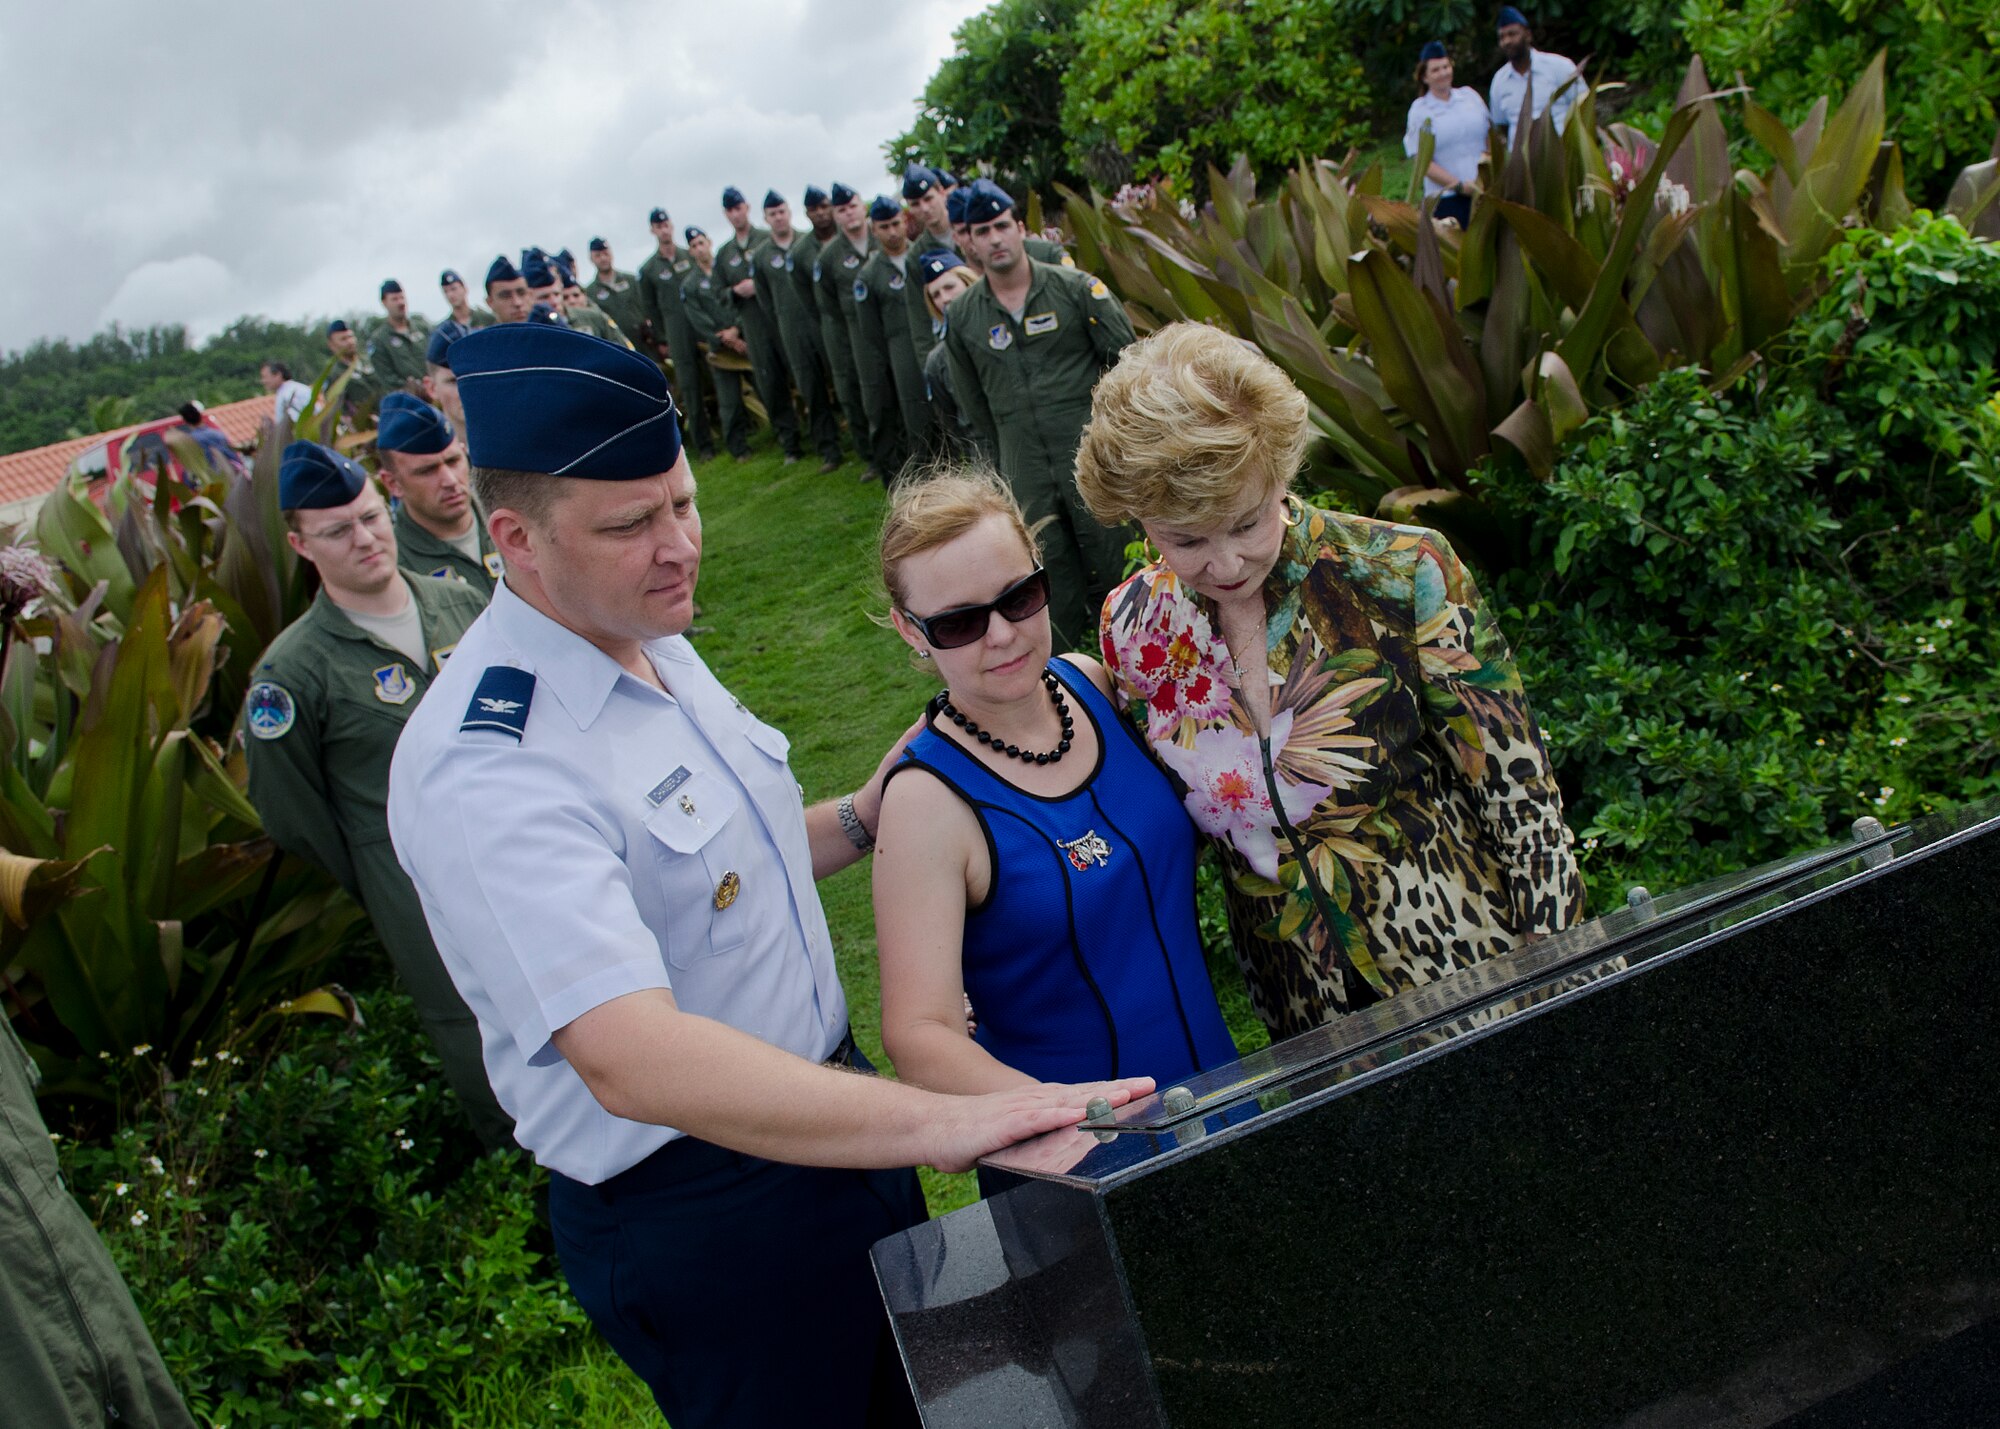 Col. Tyrell Chamberlain, 36th Wing vice commander, and his wife Elizabeth stand with Madeleine Bordallo, Guam’s U.S. Congress representative, at the Raider 21 memorial July 21, 2014, in Adelup, Guam. Members of Team Andersen and Government of Guam representatives gather annually to honor the aircrew lost during a mission in support of the 2008 Liberation Day parade. (U.S. Air Force photo by Senior Airman Katrina M. Brisbin/Released)